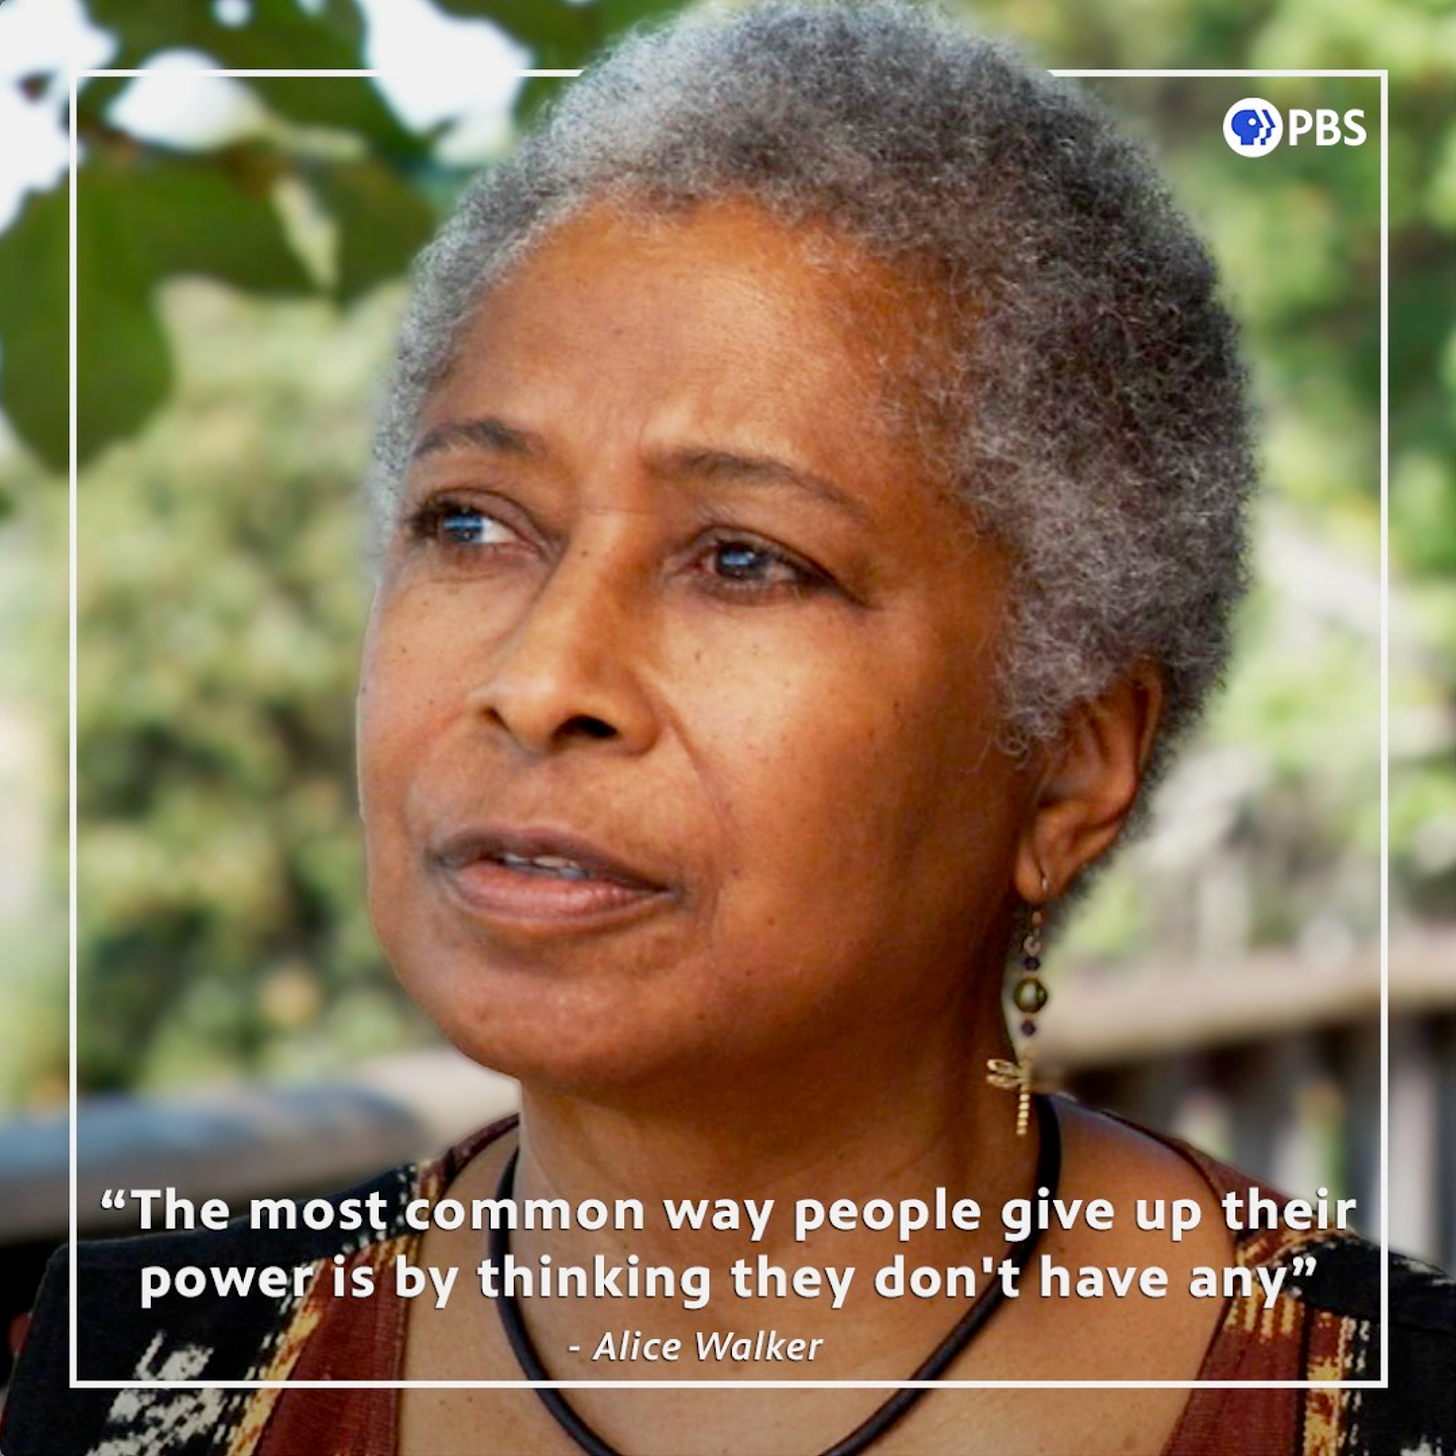 "The most common way people give up their power is by thinking they don't have any." - Alice Walker (photo of Alice Walker from PBS)